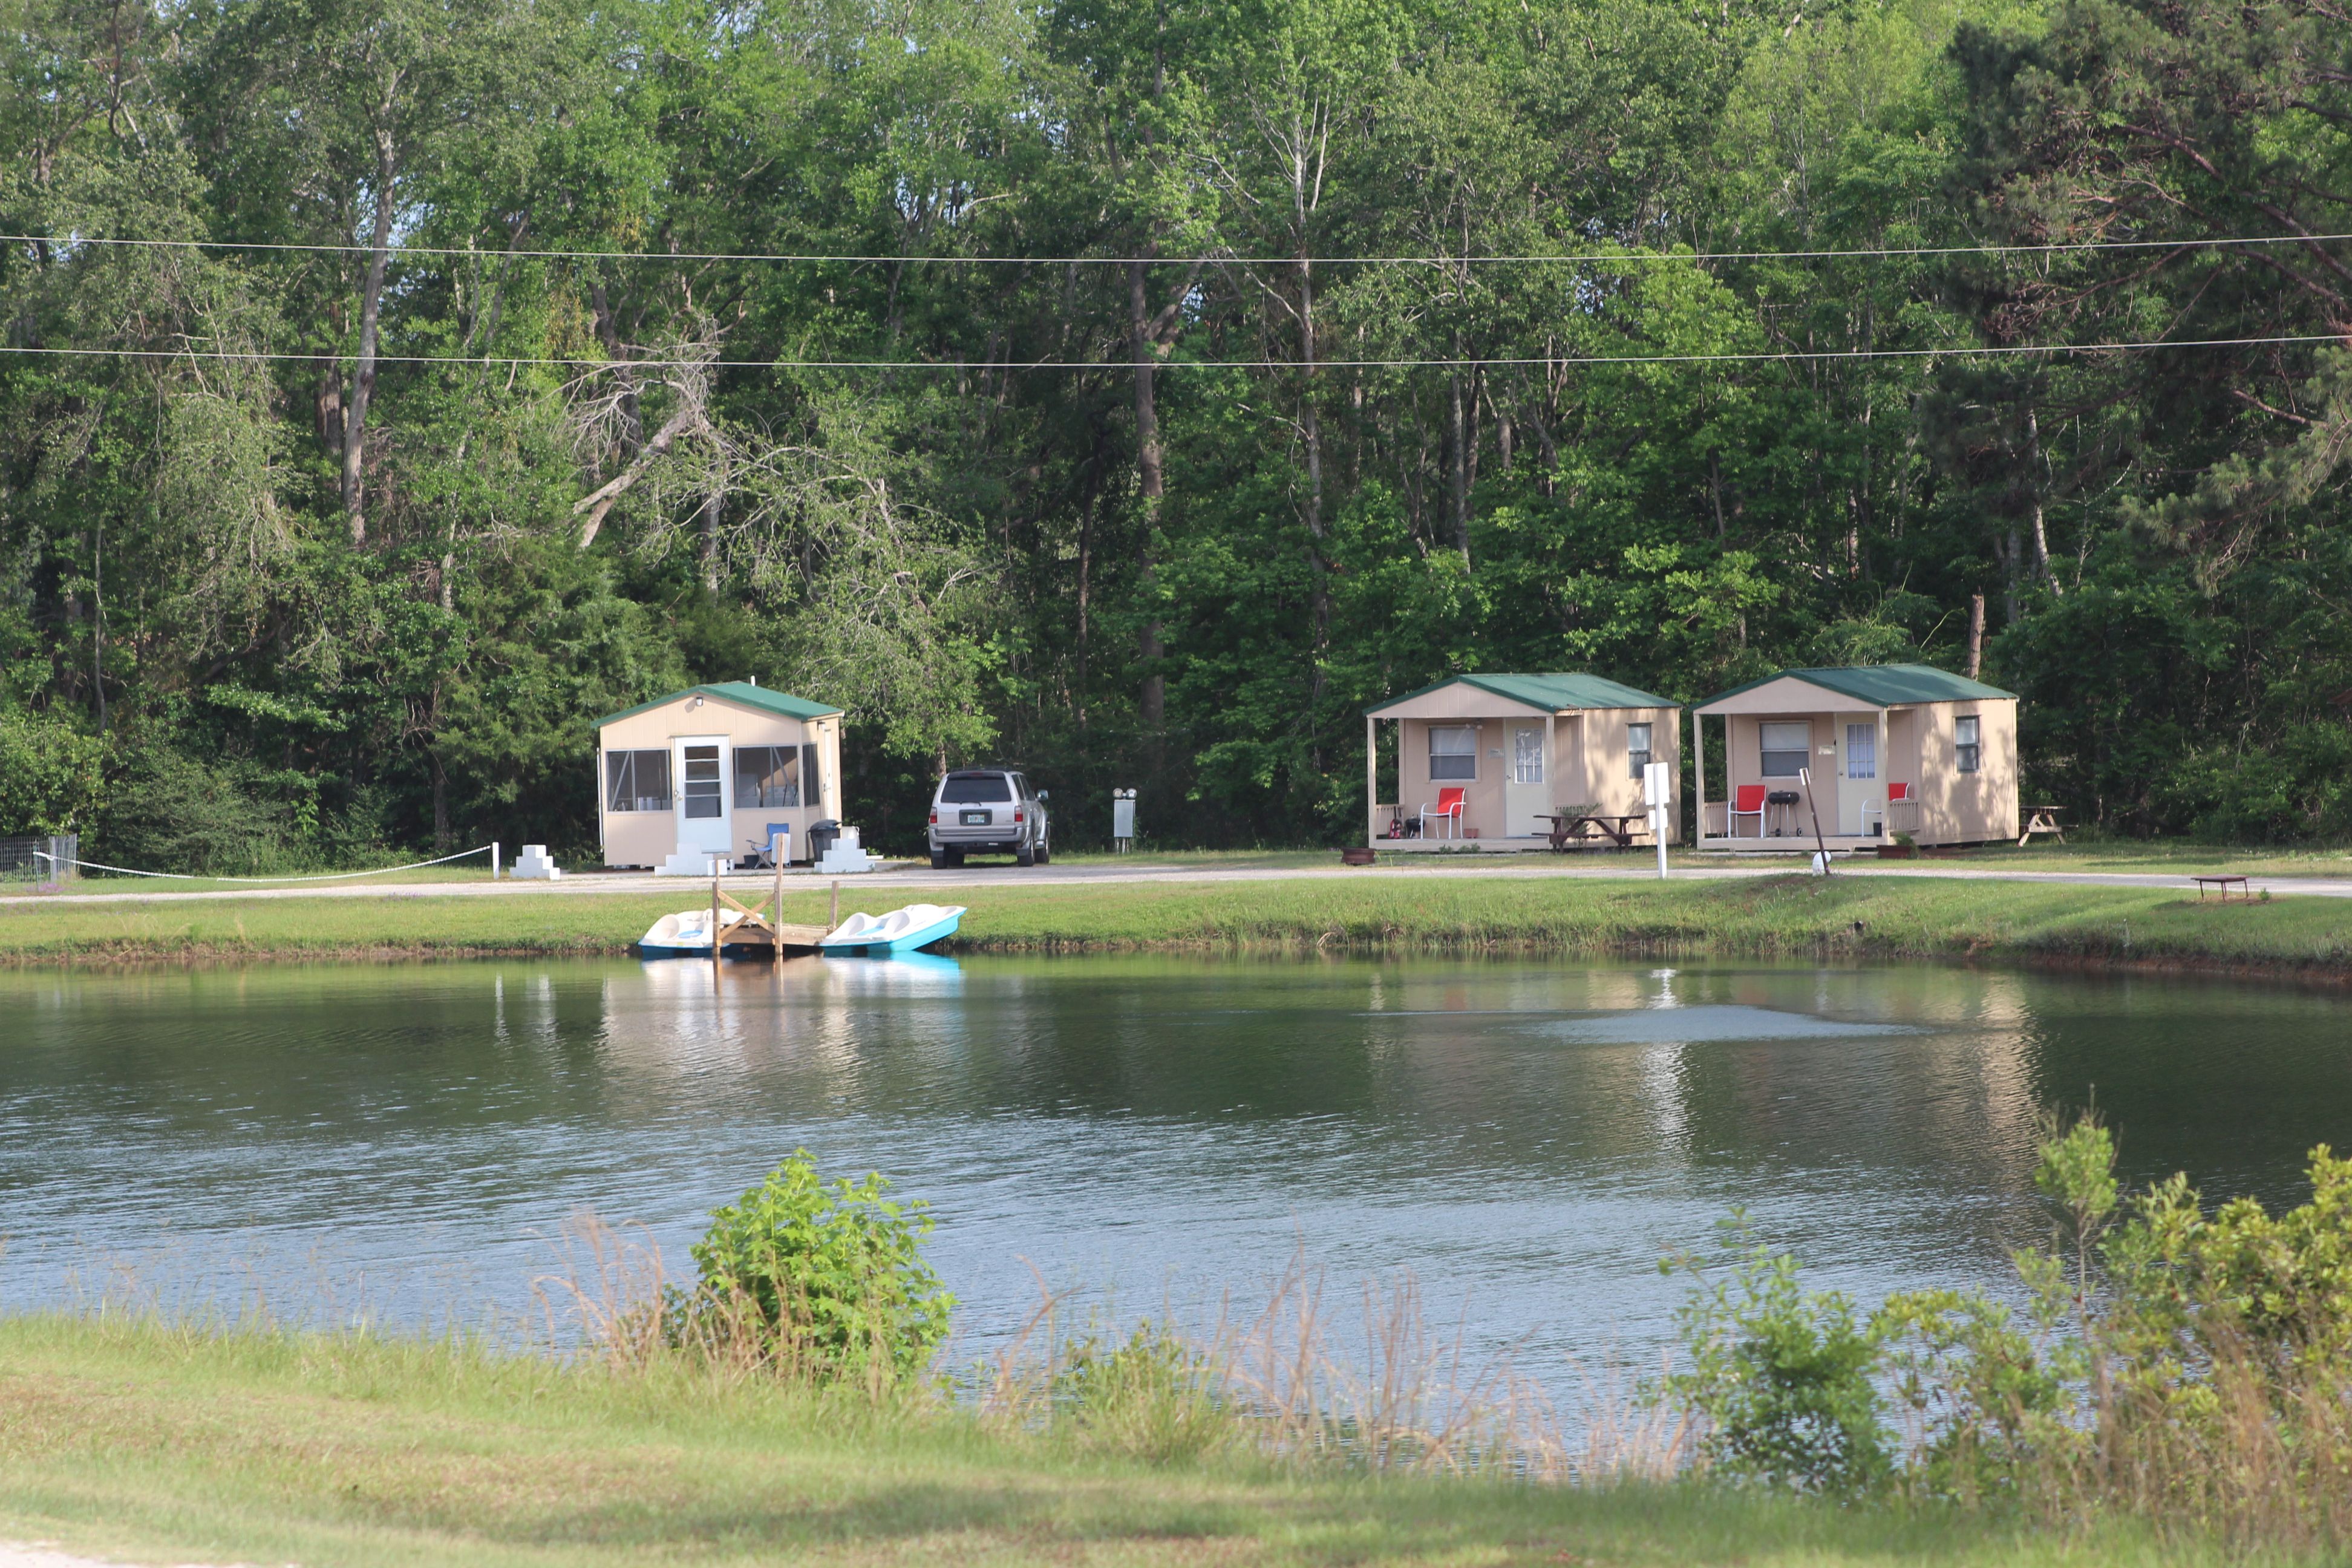 Beaver Run RV Park – Peaceful Camping In The Pines